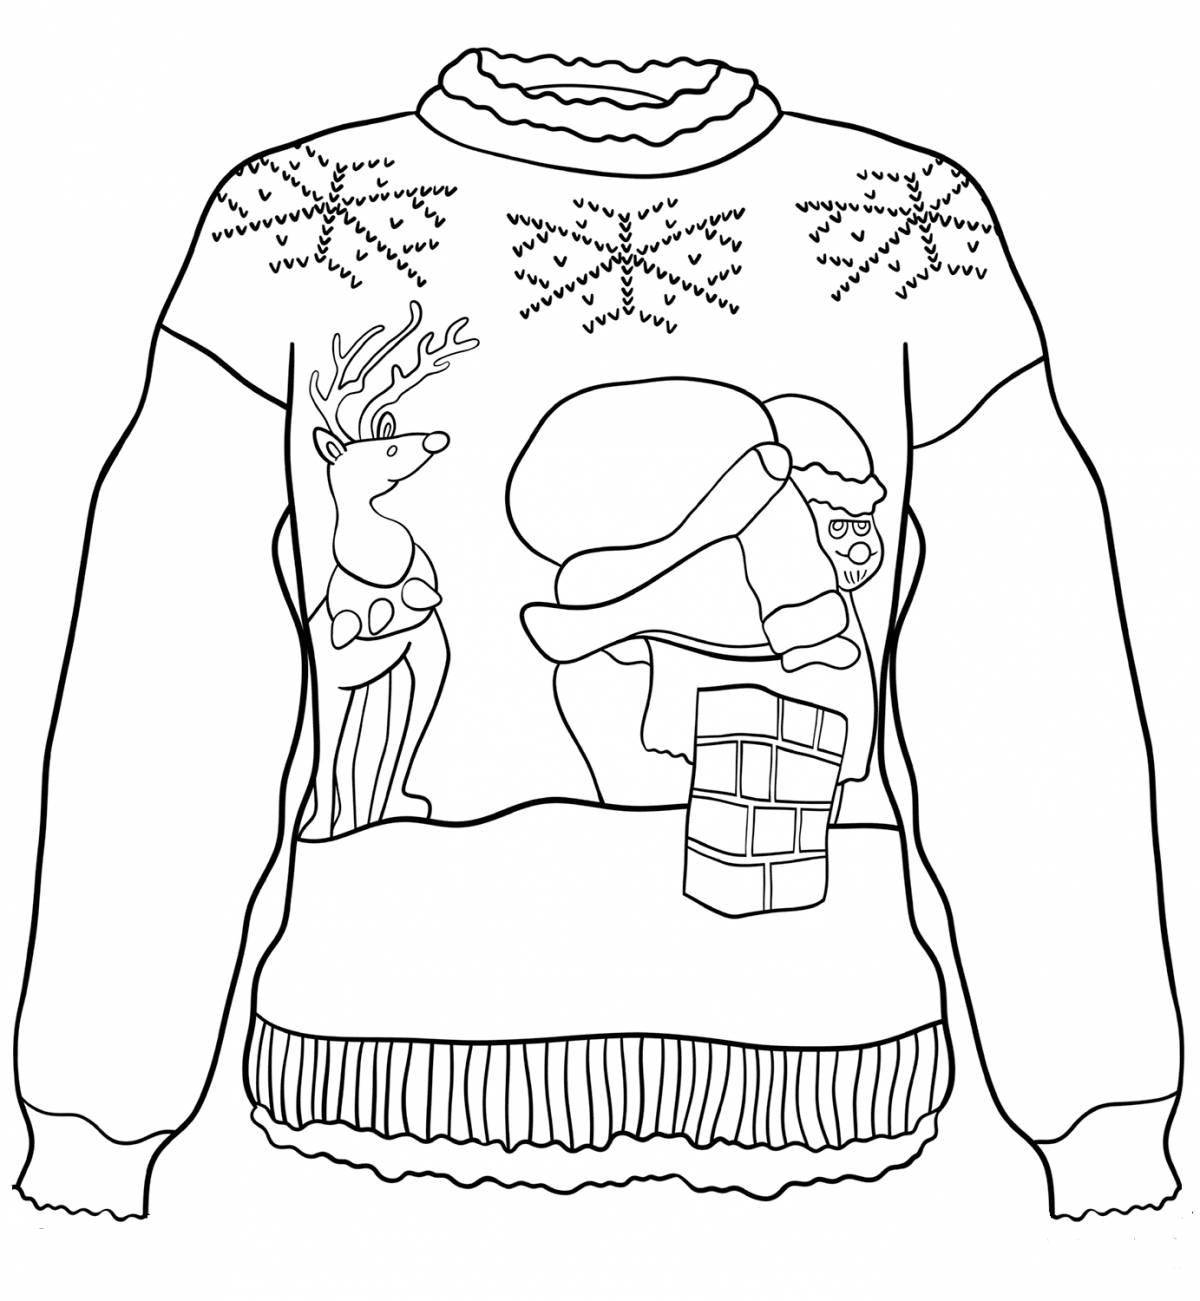 Charming jumper coloring page